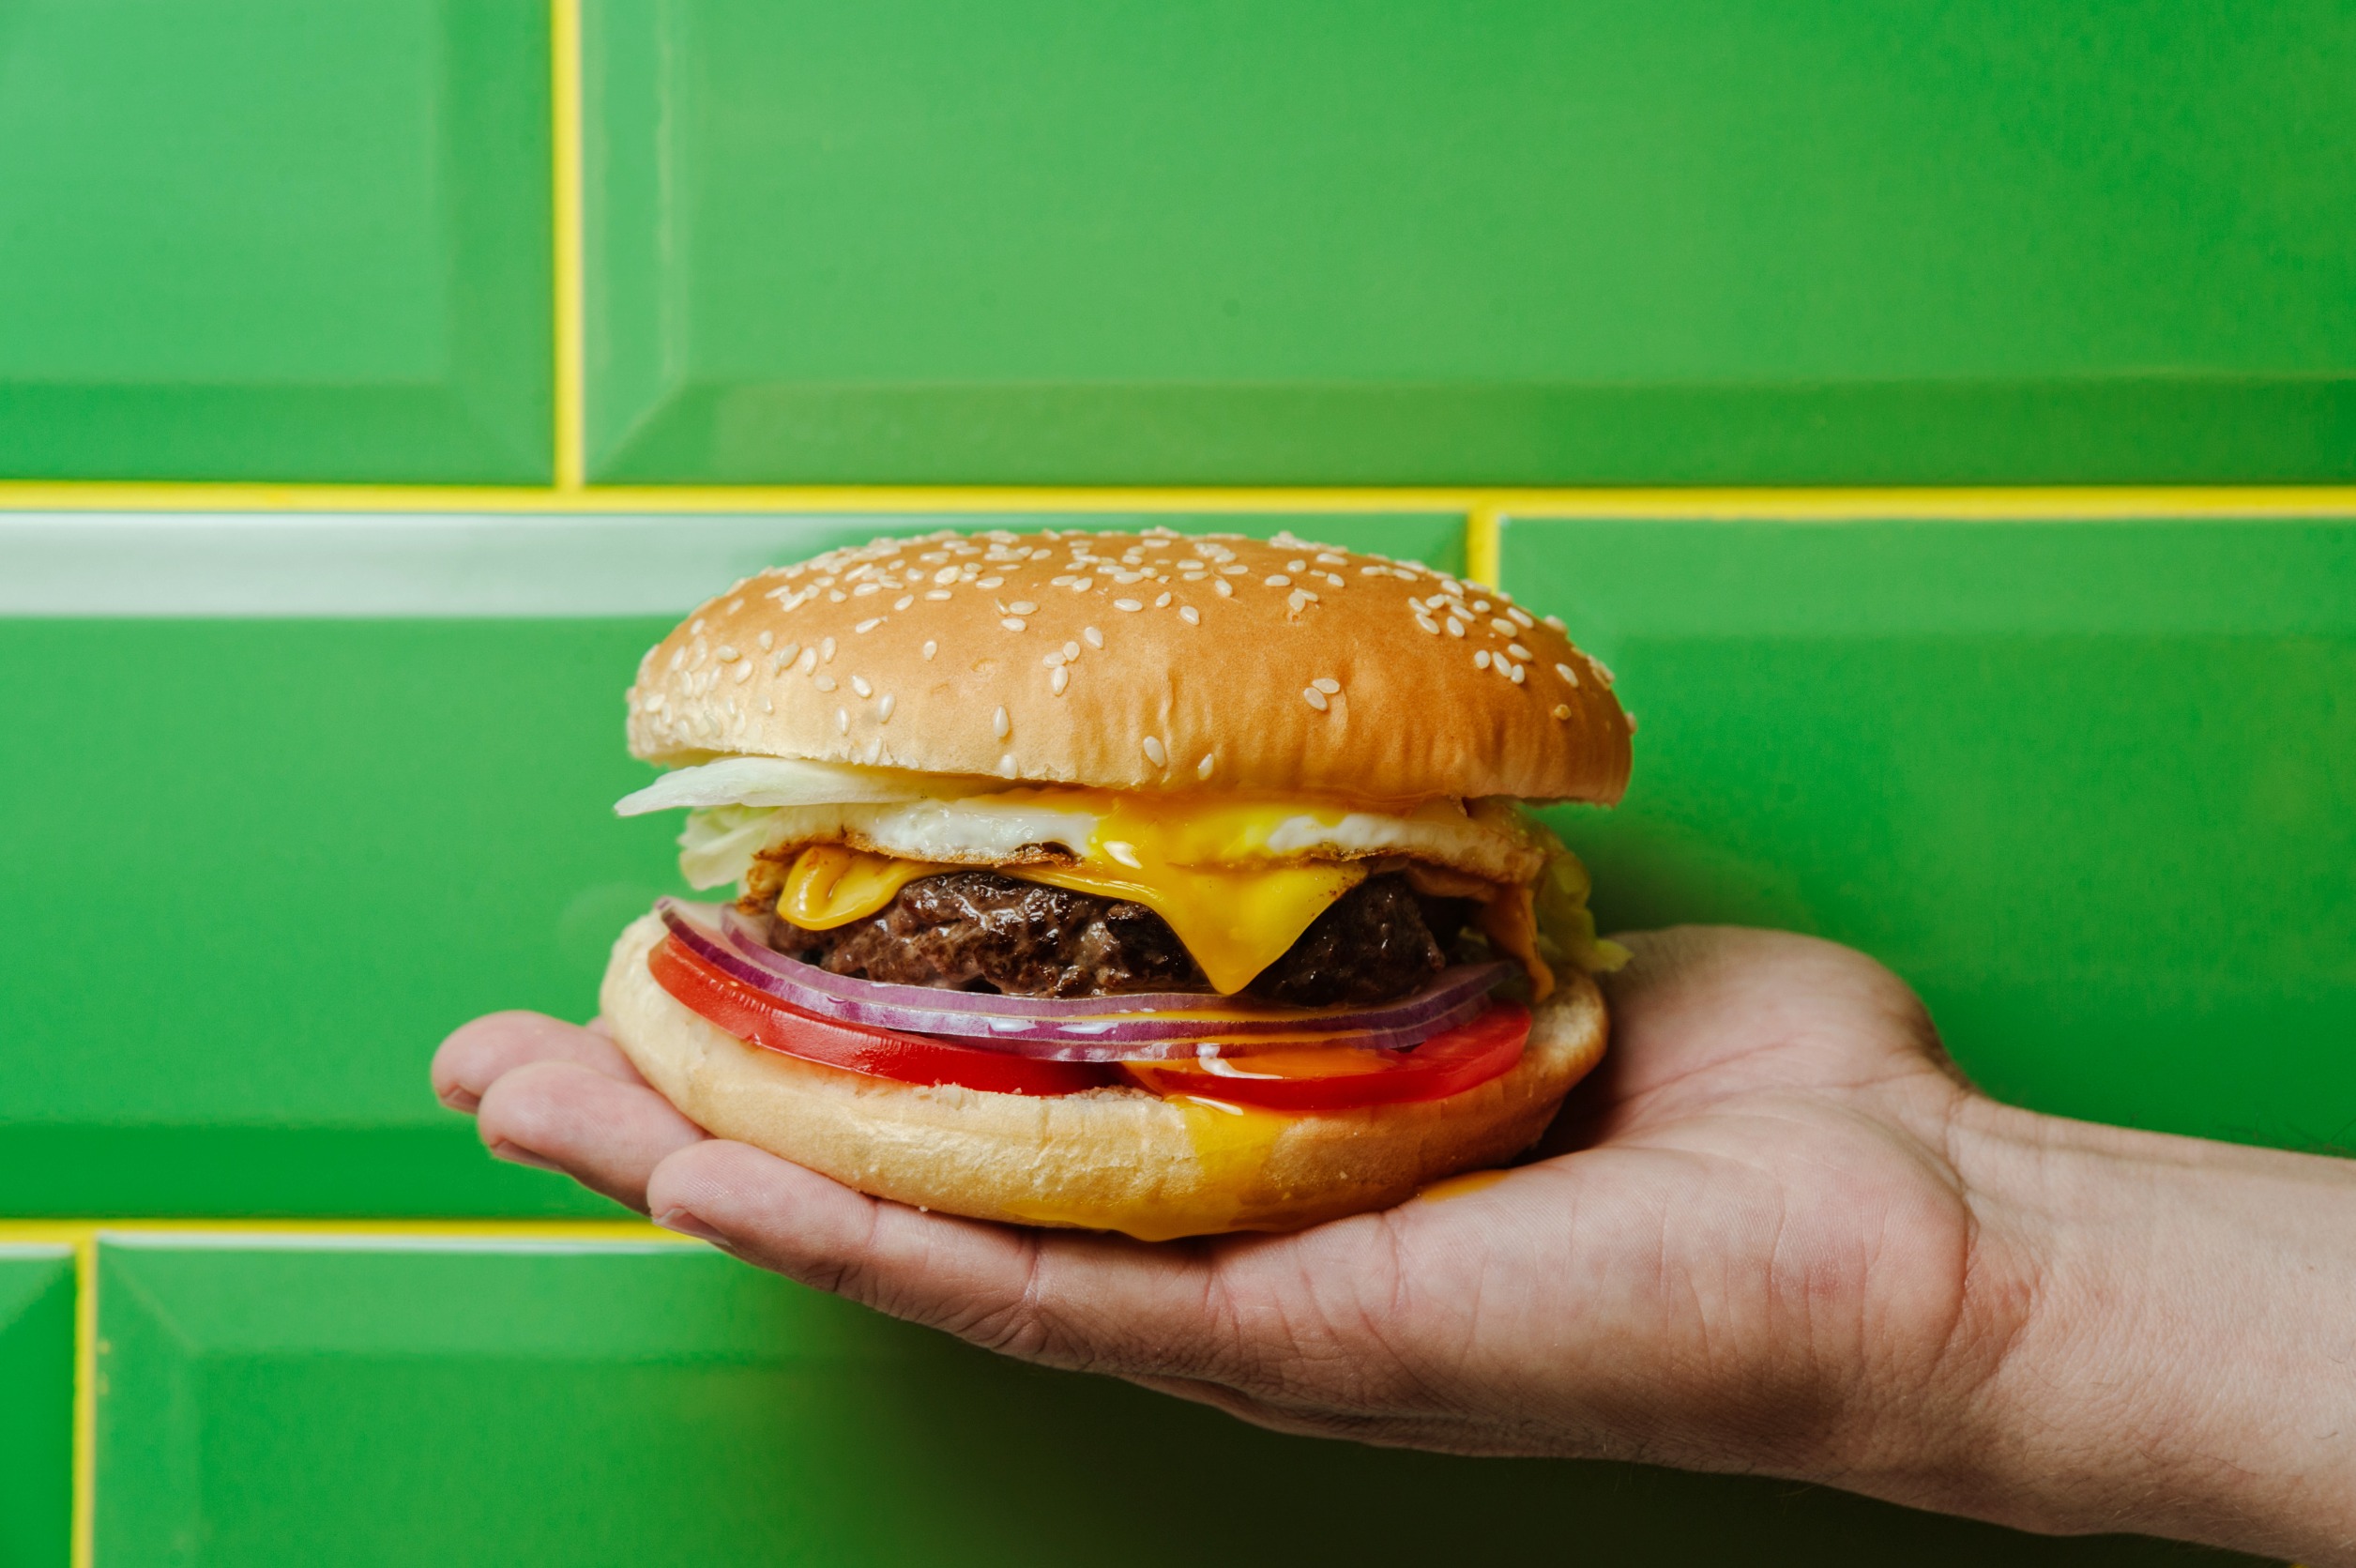 fast food hamburgers have risen significantly with inflation